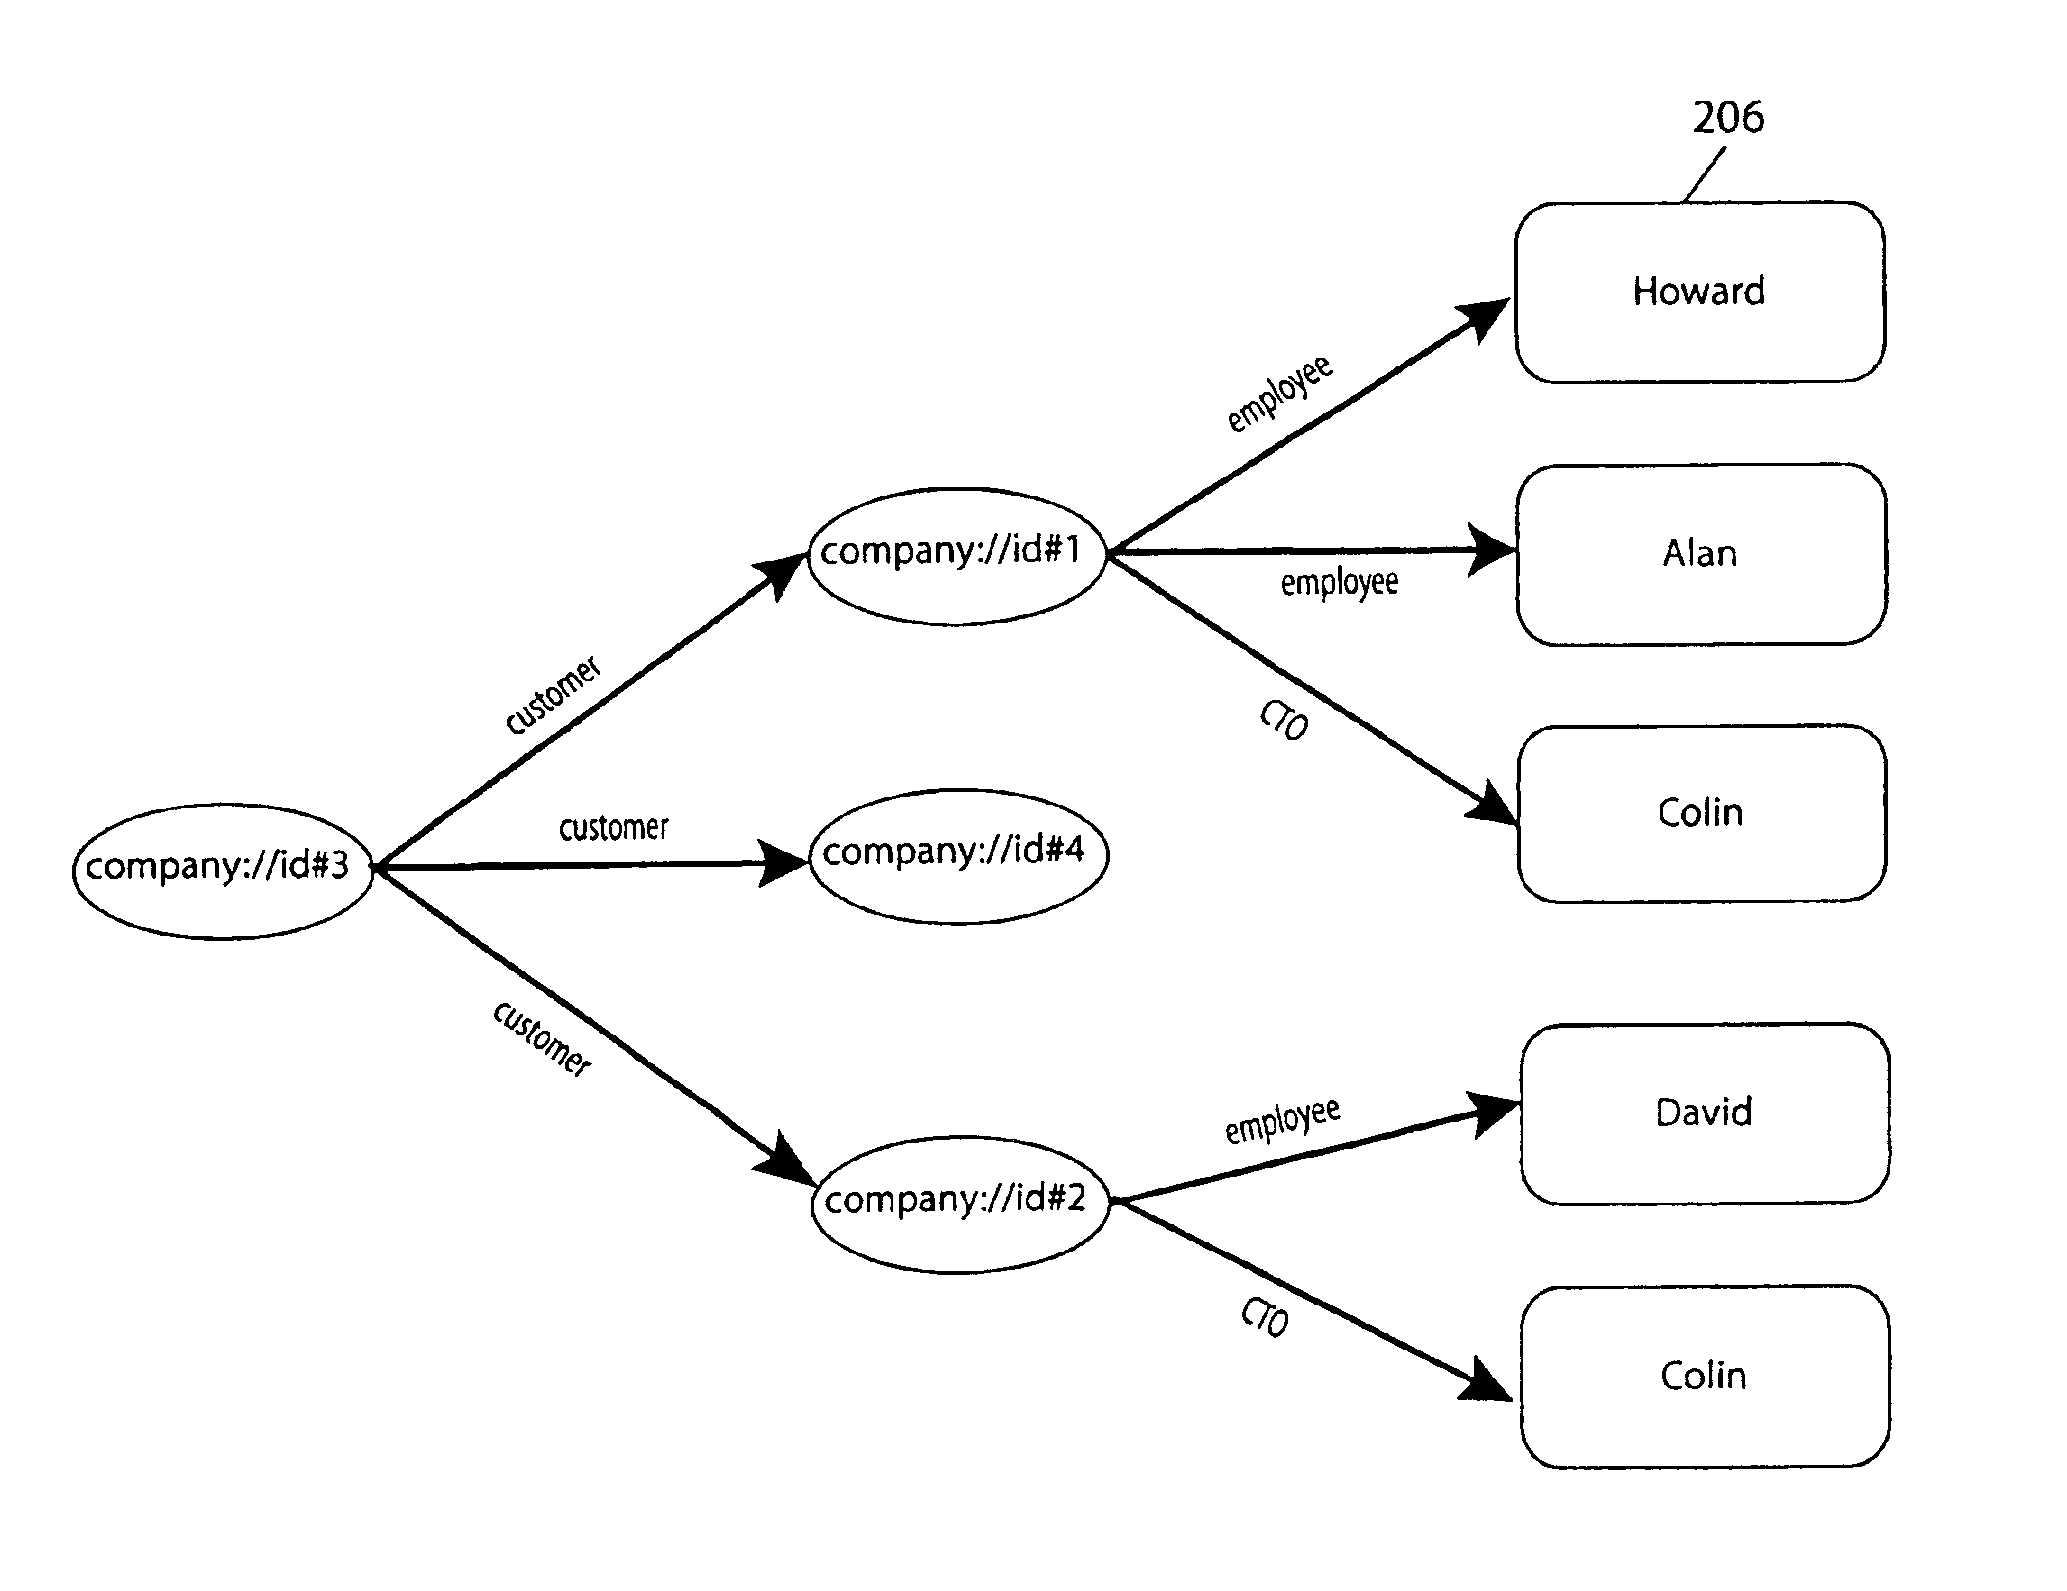 Methods and apparatus for querying a relational data store using schema-less queries